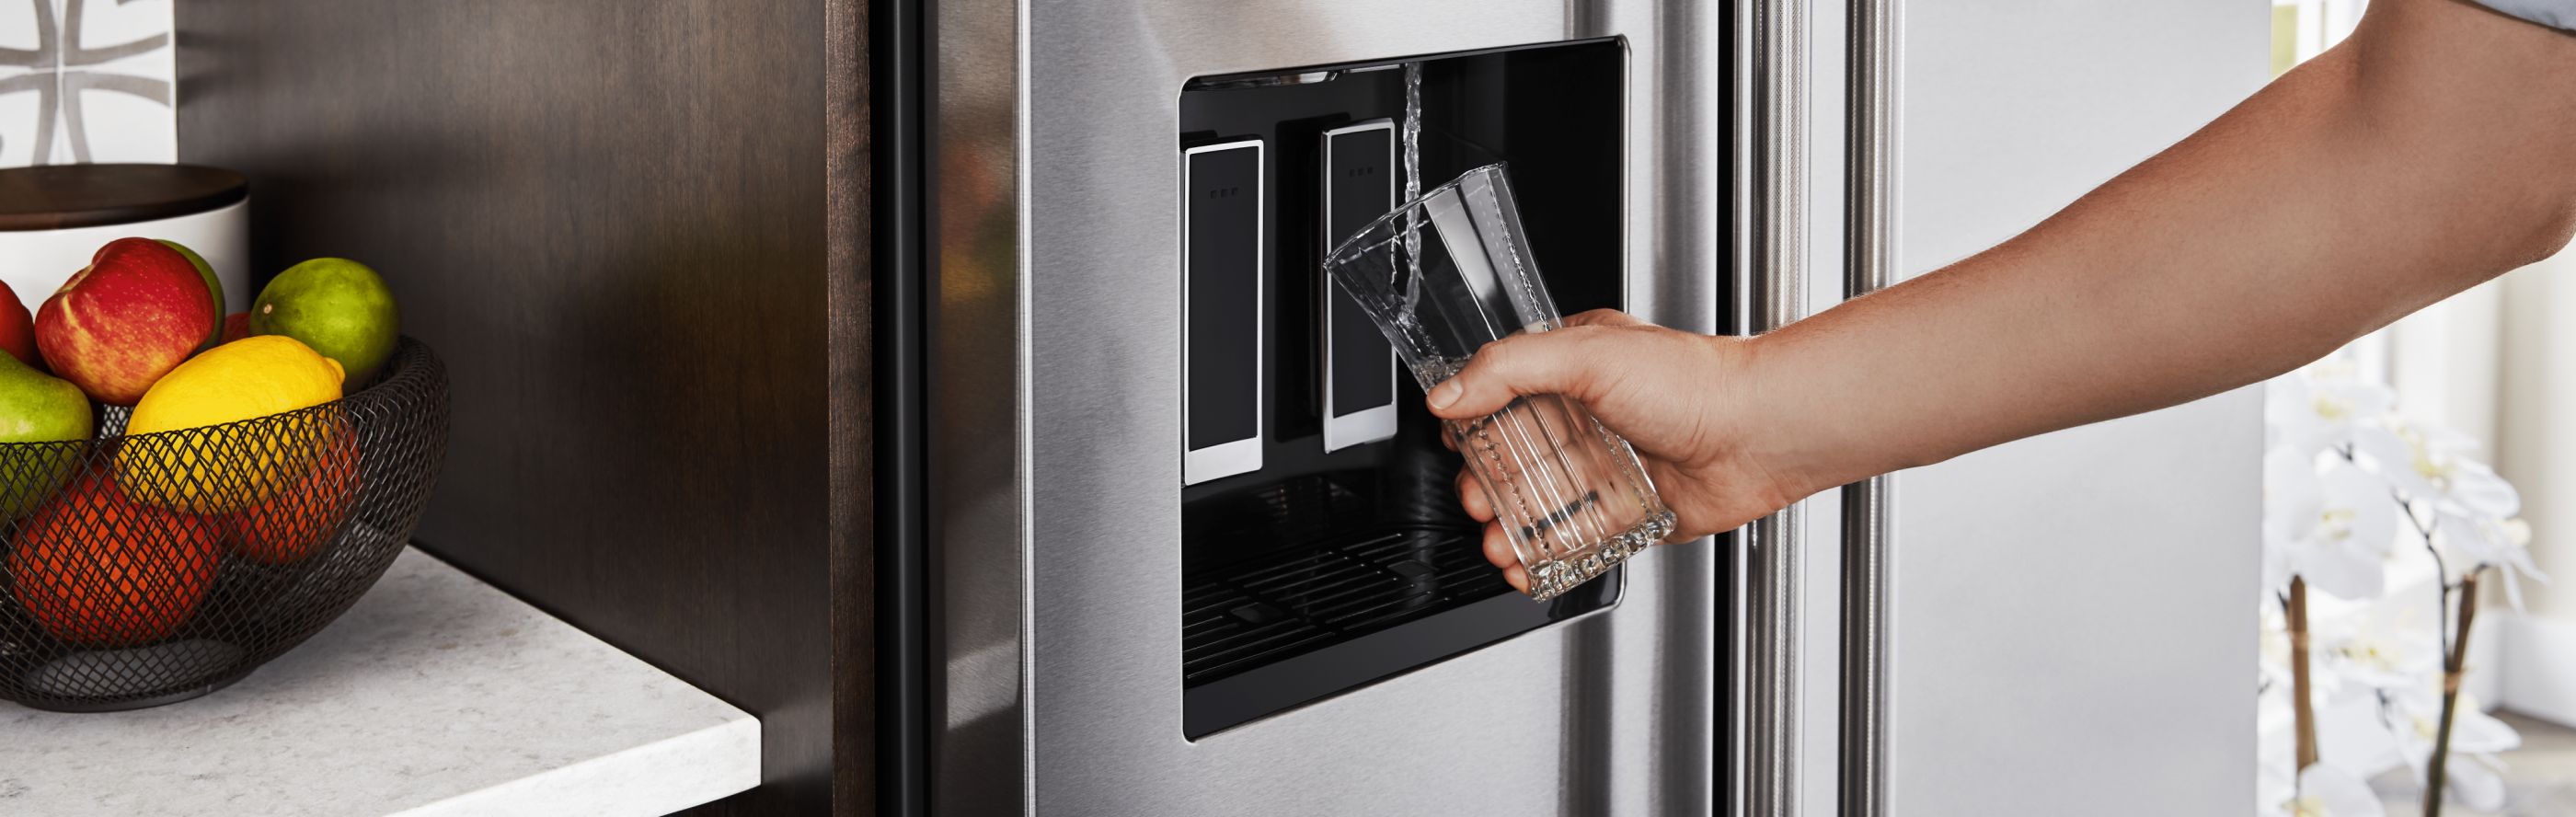 Person filling a glass of water from a refrigerator door